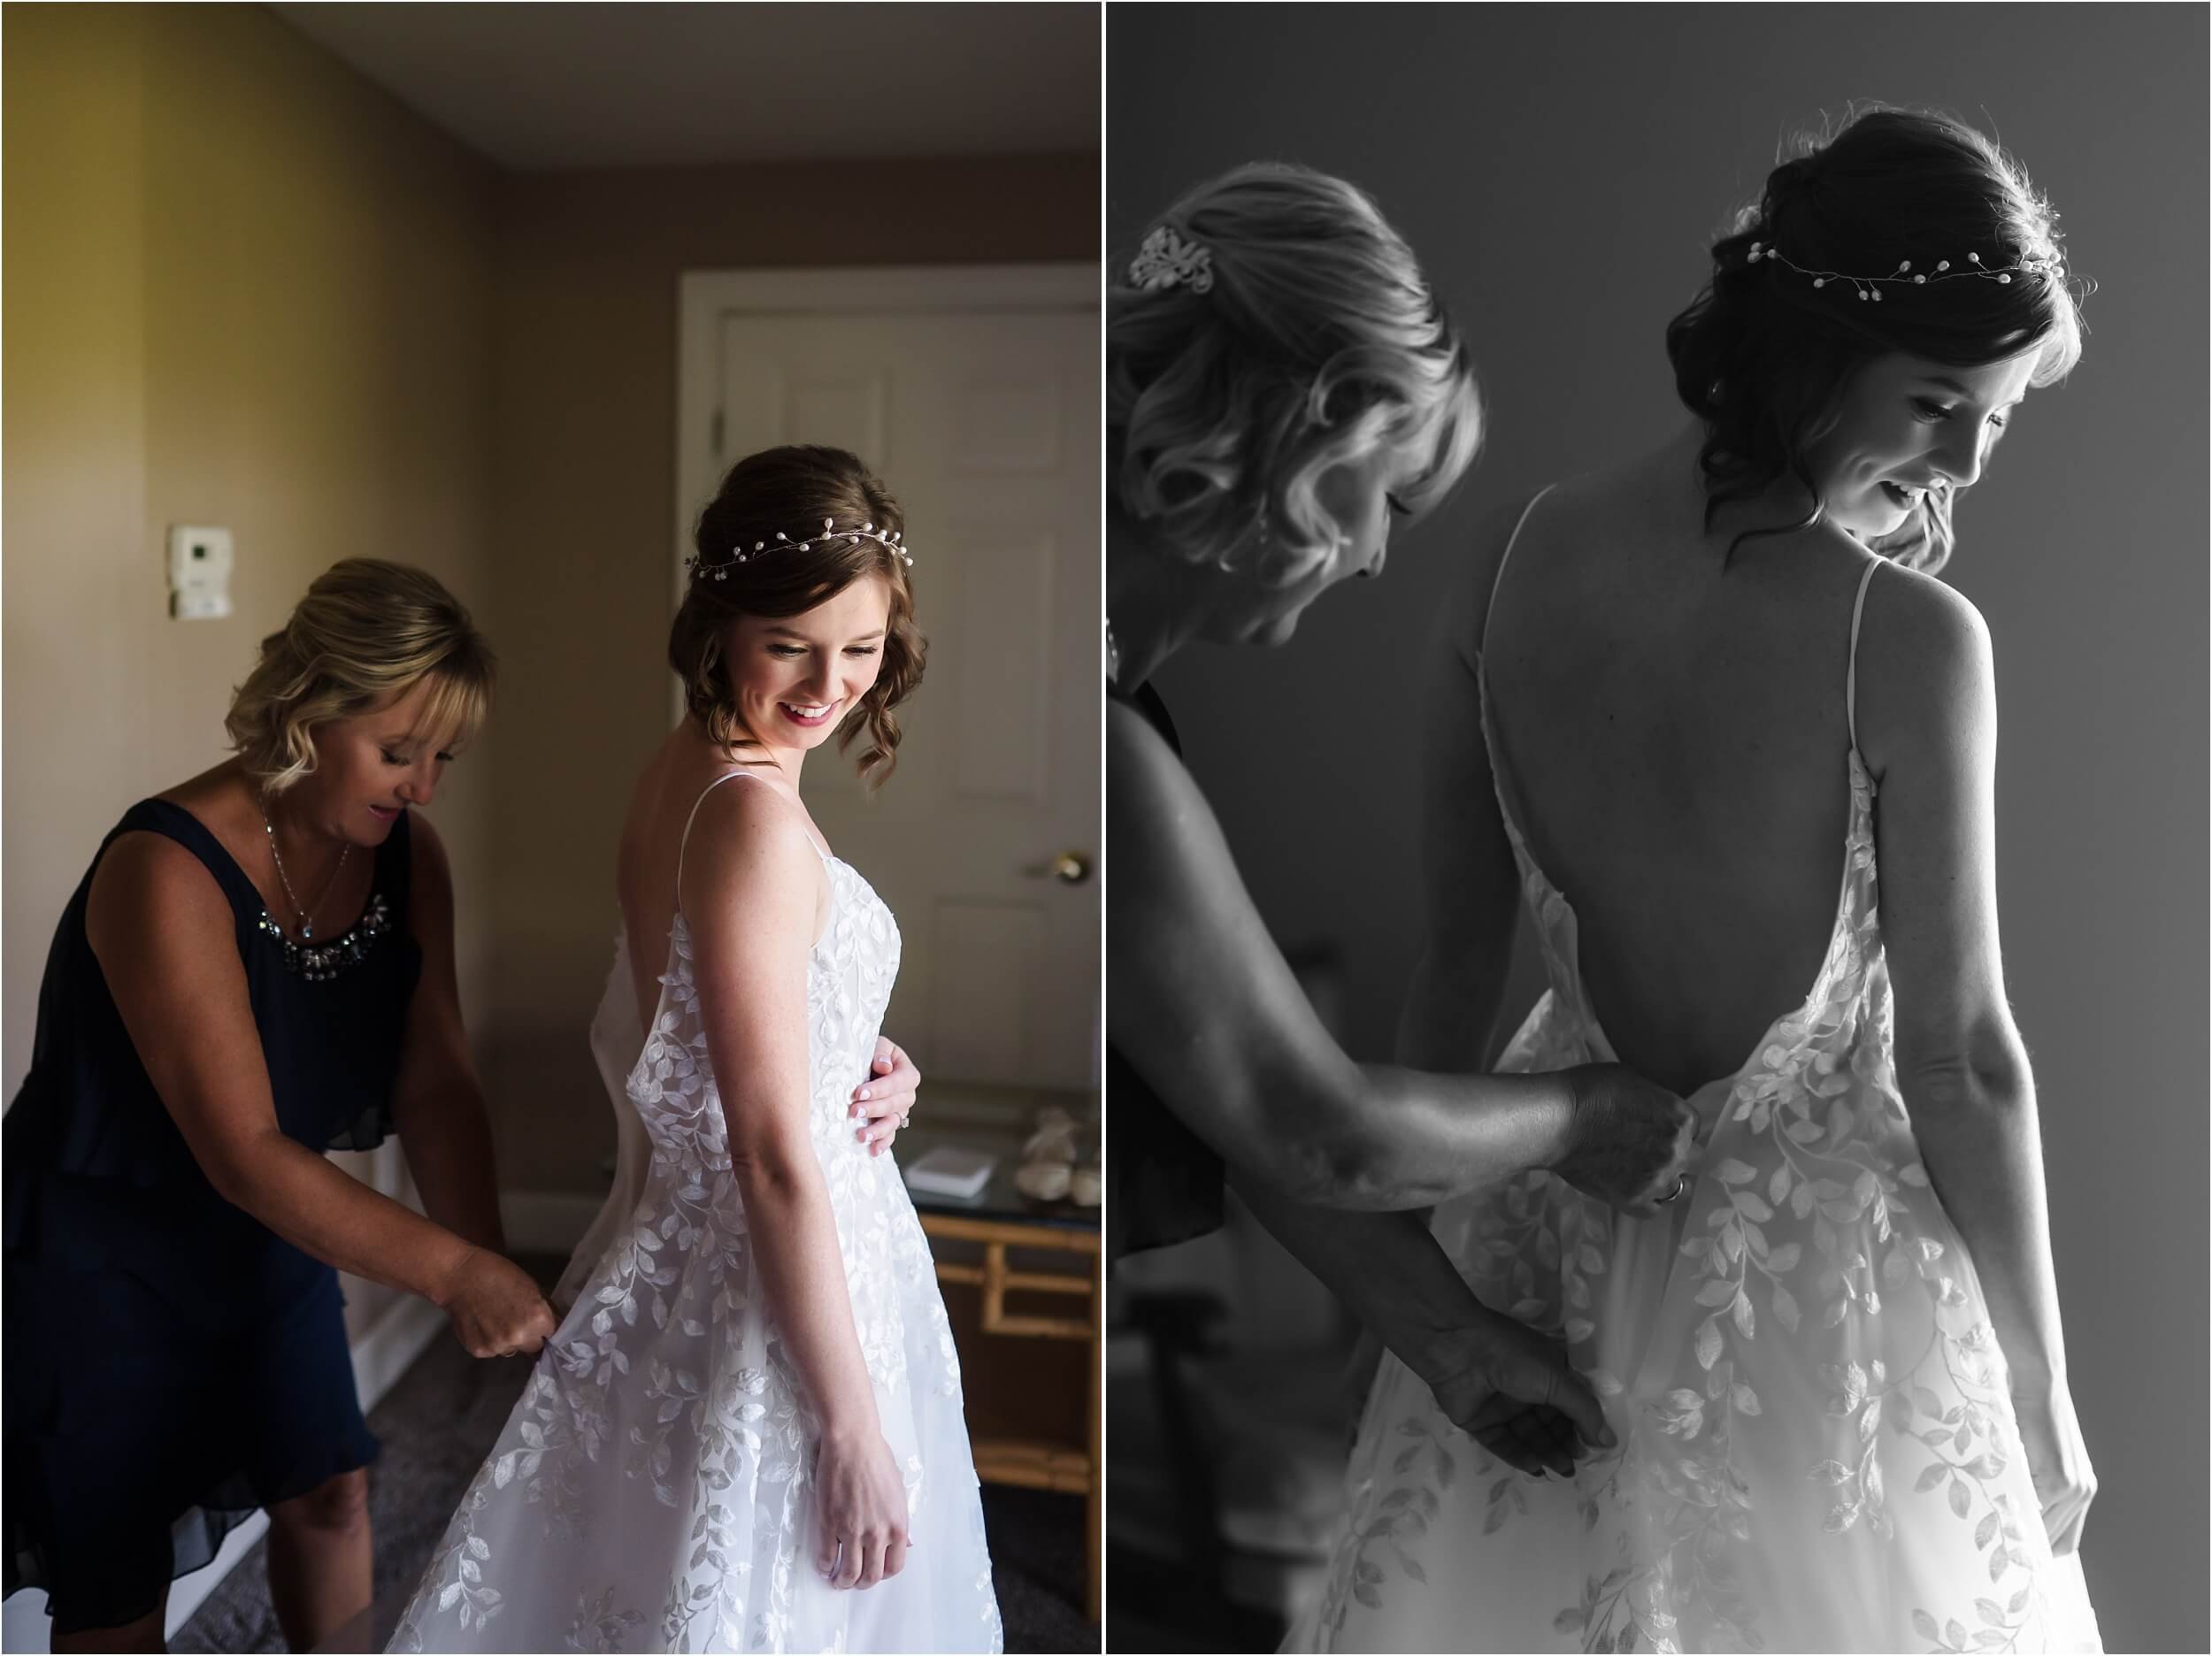  A mom helps her daughter zip up her white wedding dress.  